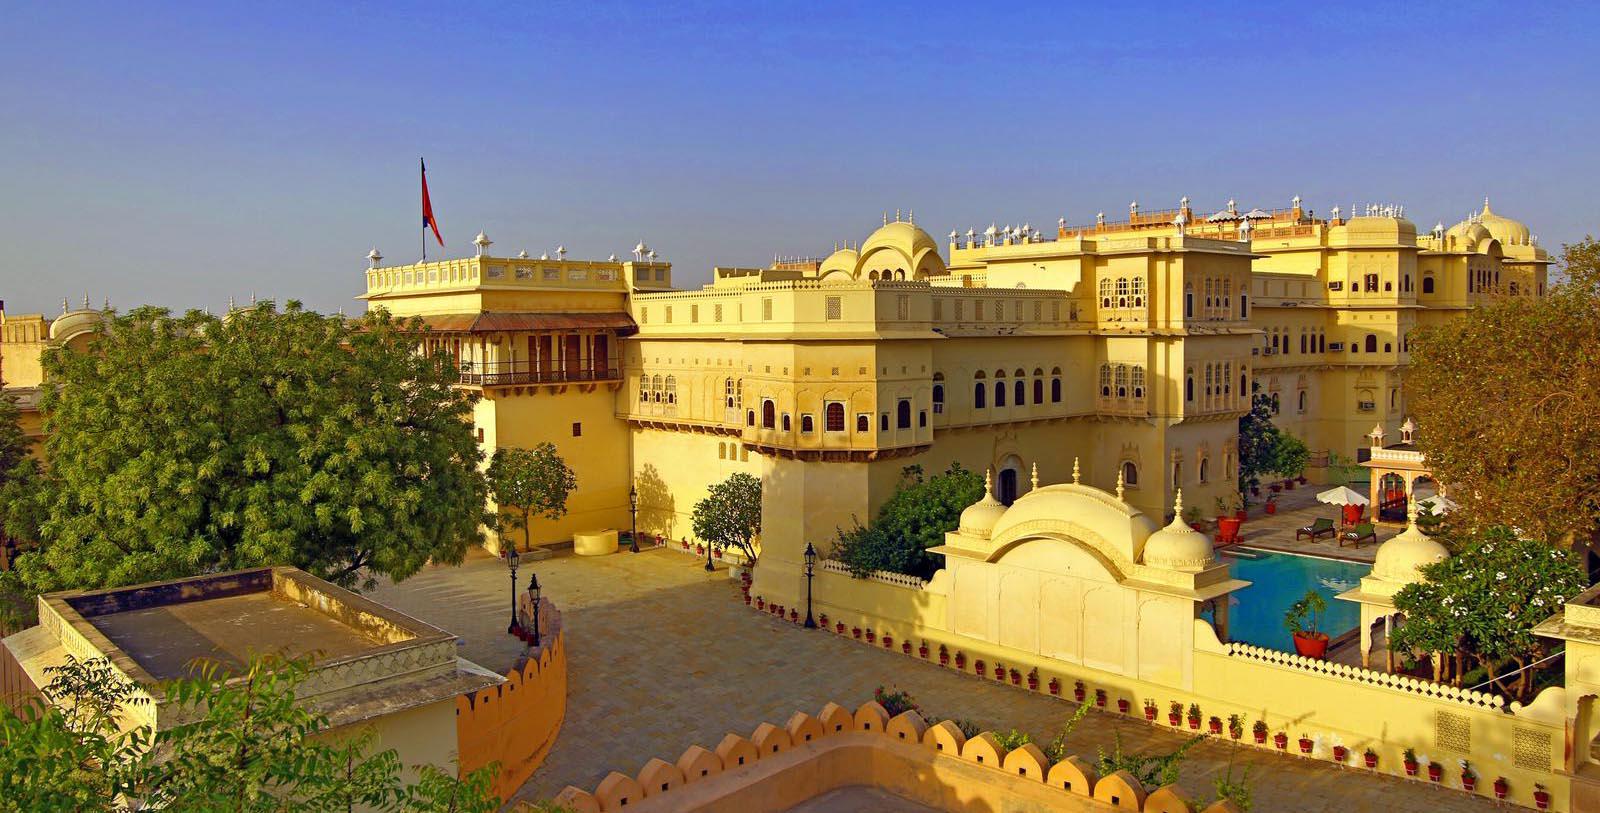 Discover the delicate Rajasthani motifs of this ancient palace.